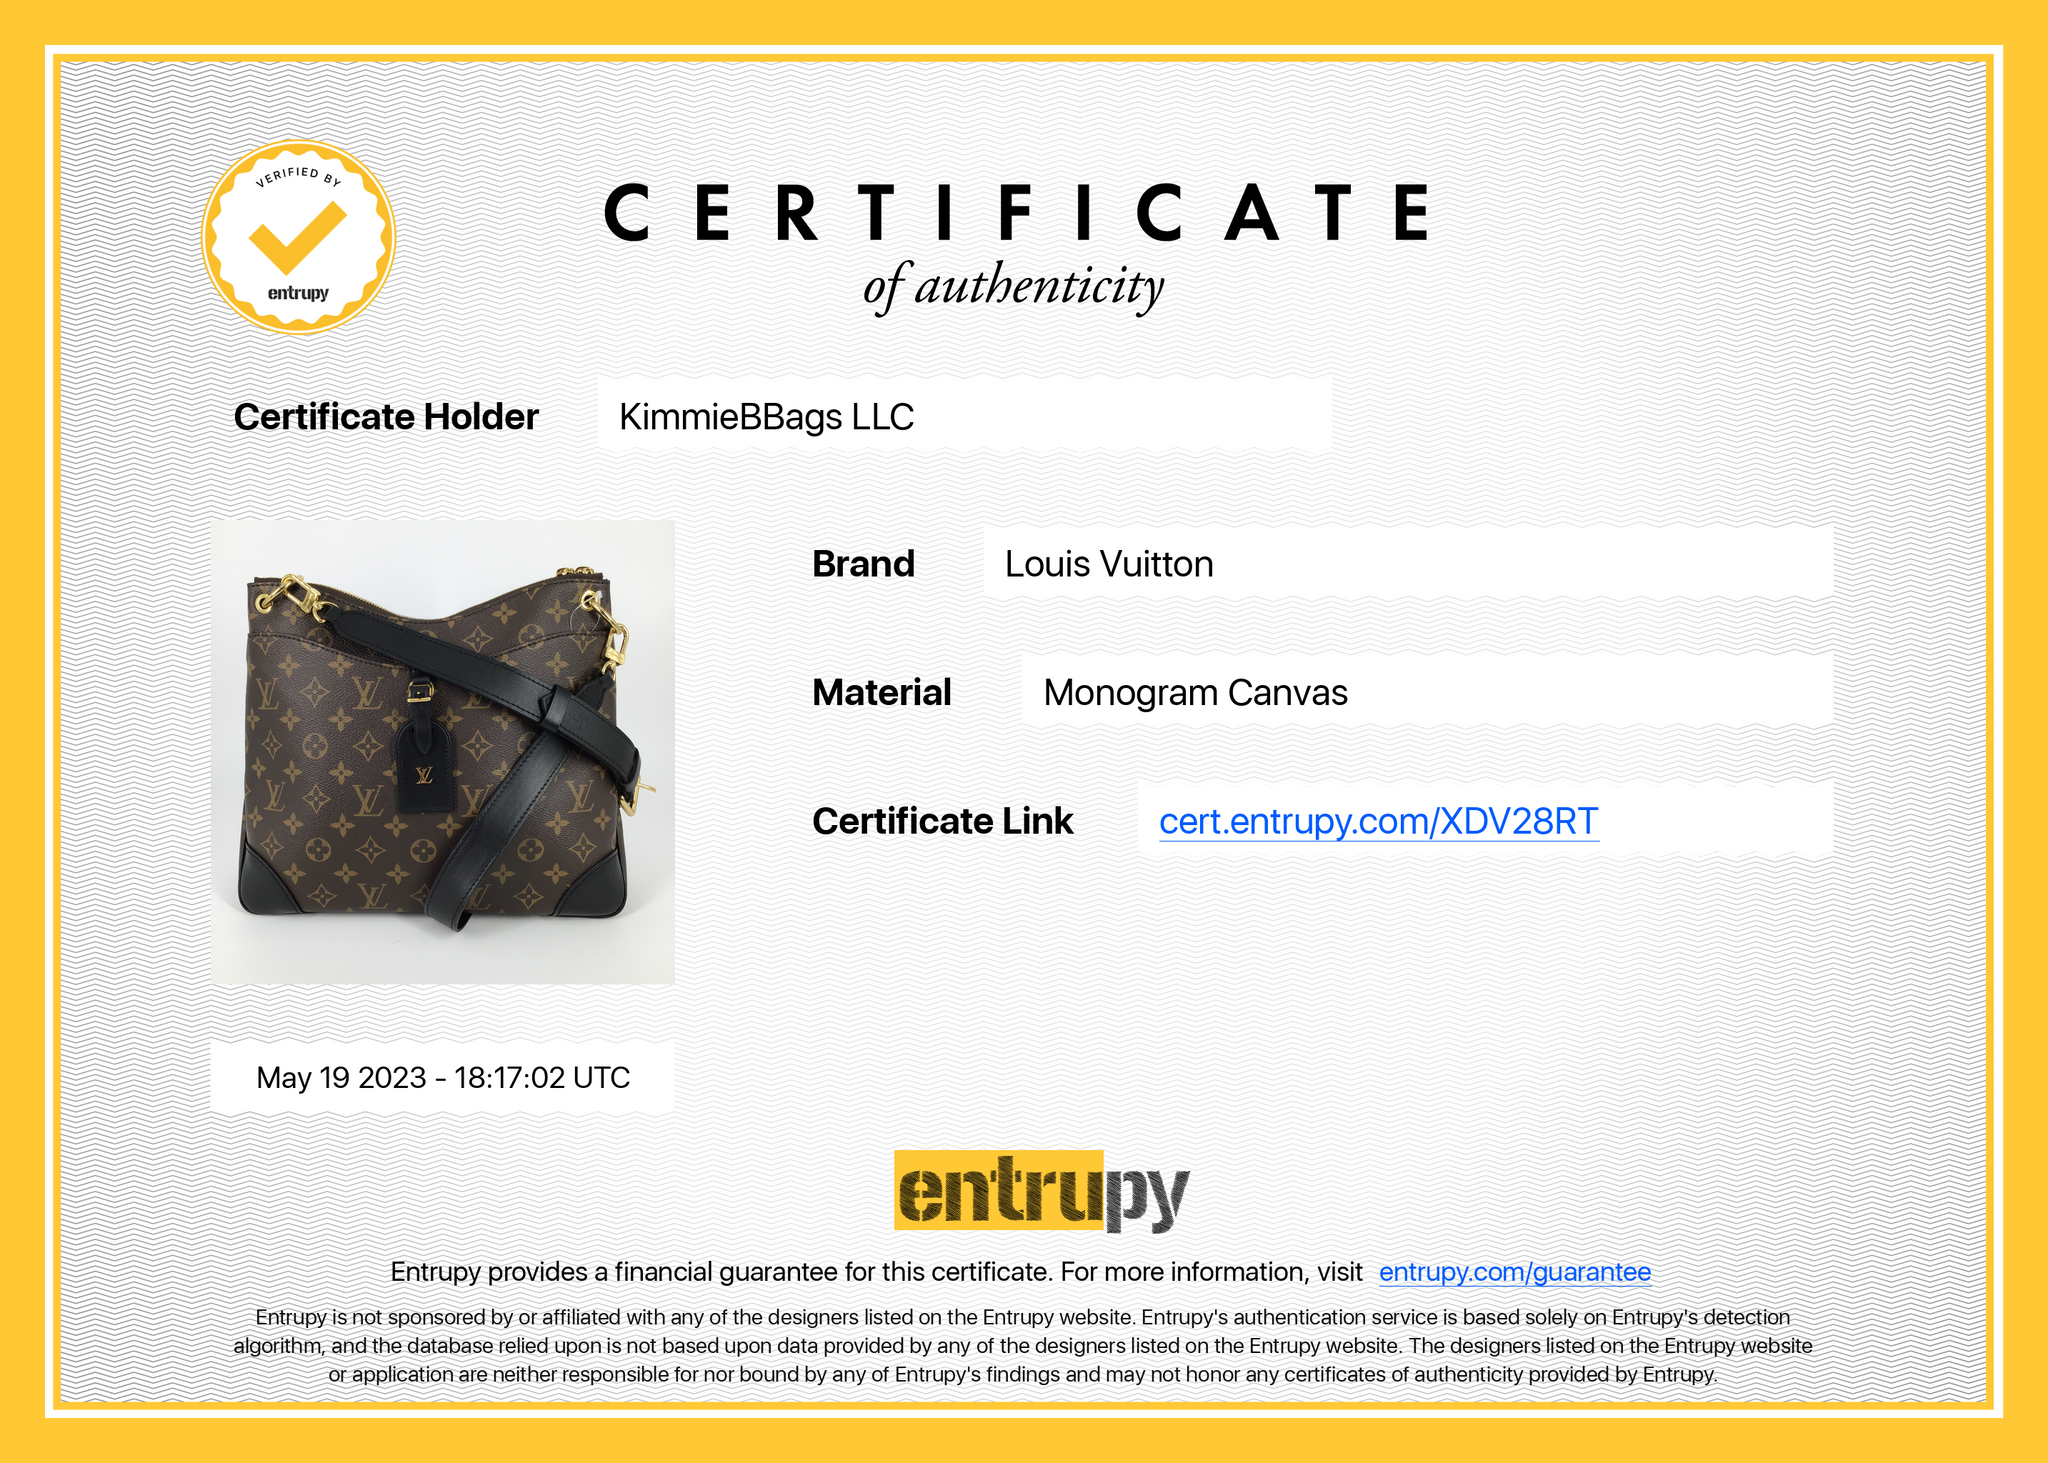 Louis Vuitton Monogram Odeon PM Crossbody - A World Of Goods For You, LLC